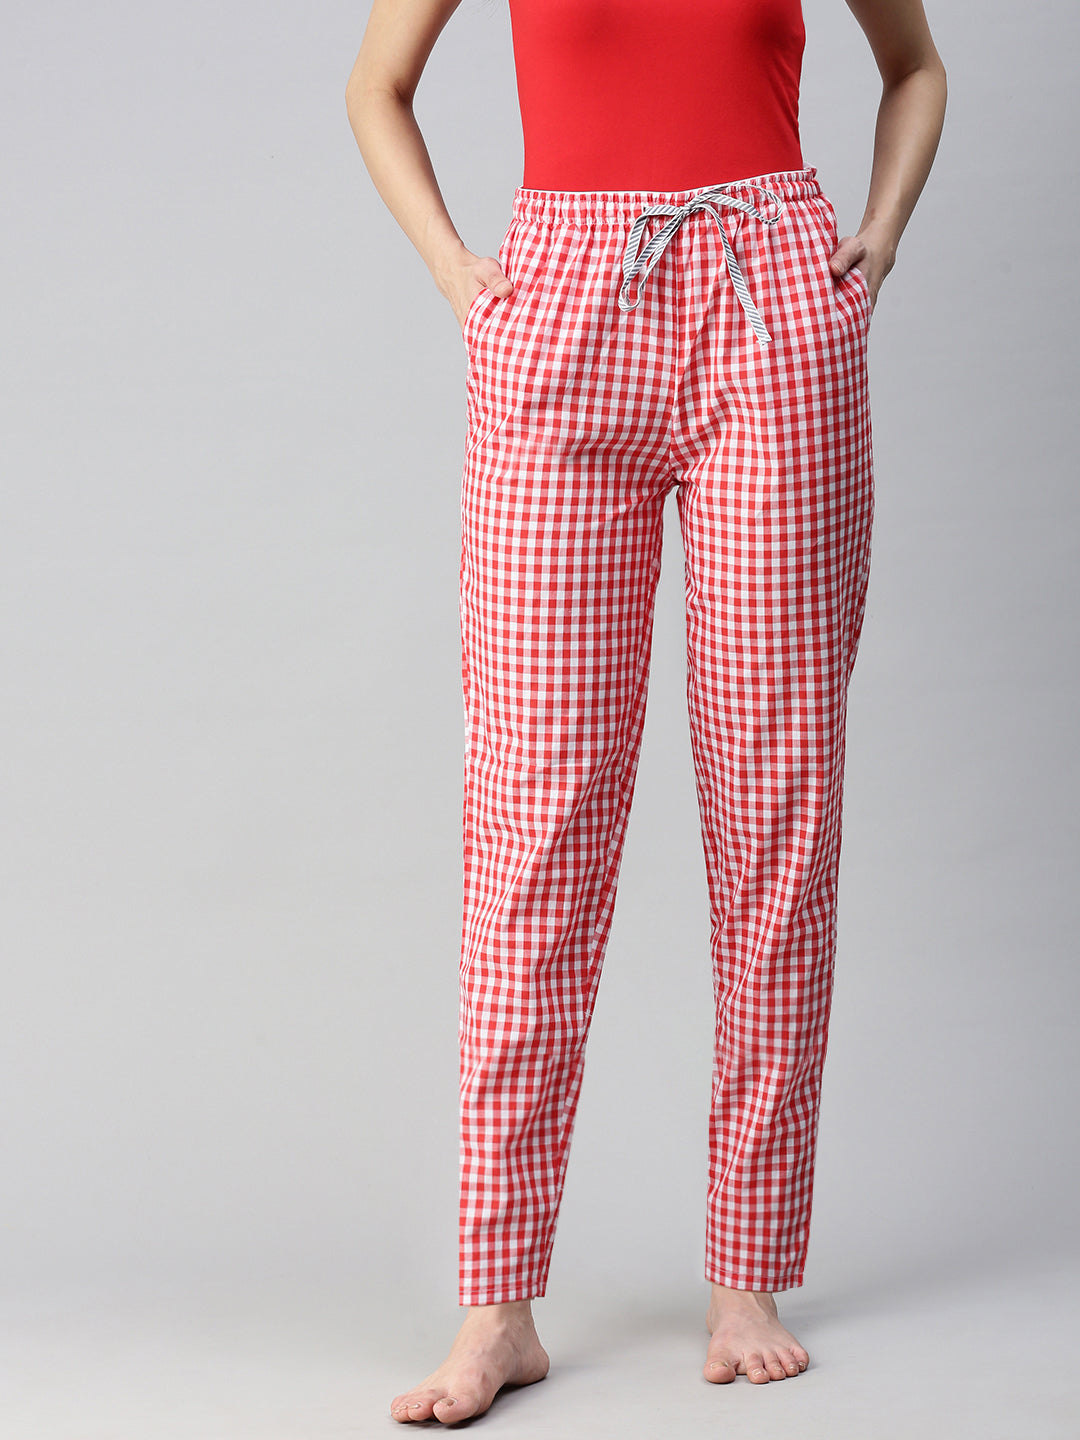 The Red Checkered Past Women PJ Pants